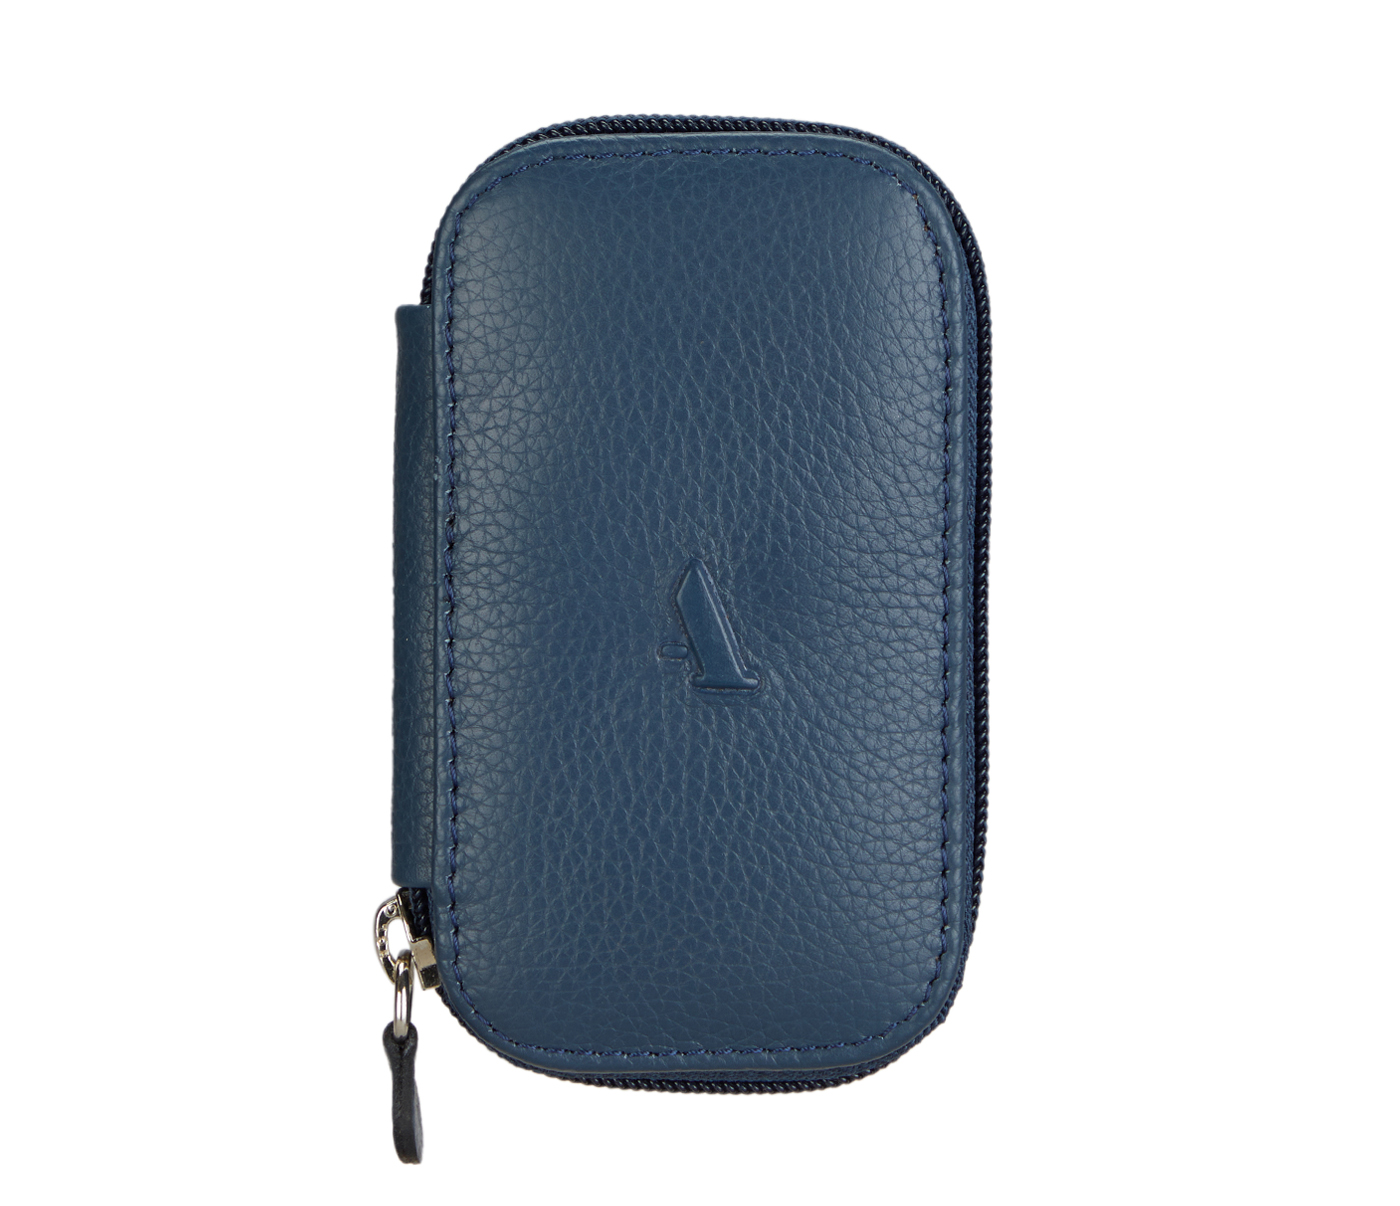 W55--Keycase with zipper closing in Genuine Leather - Blue